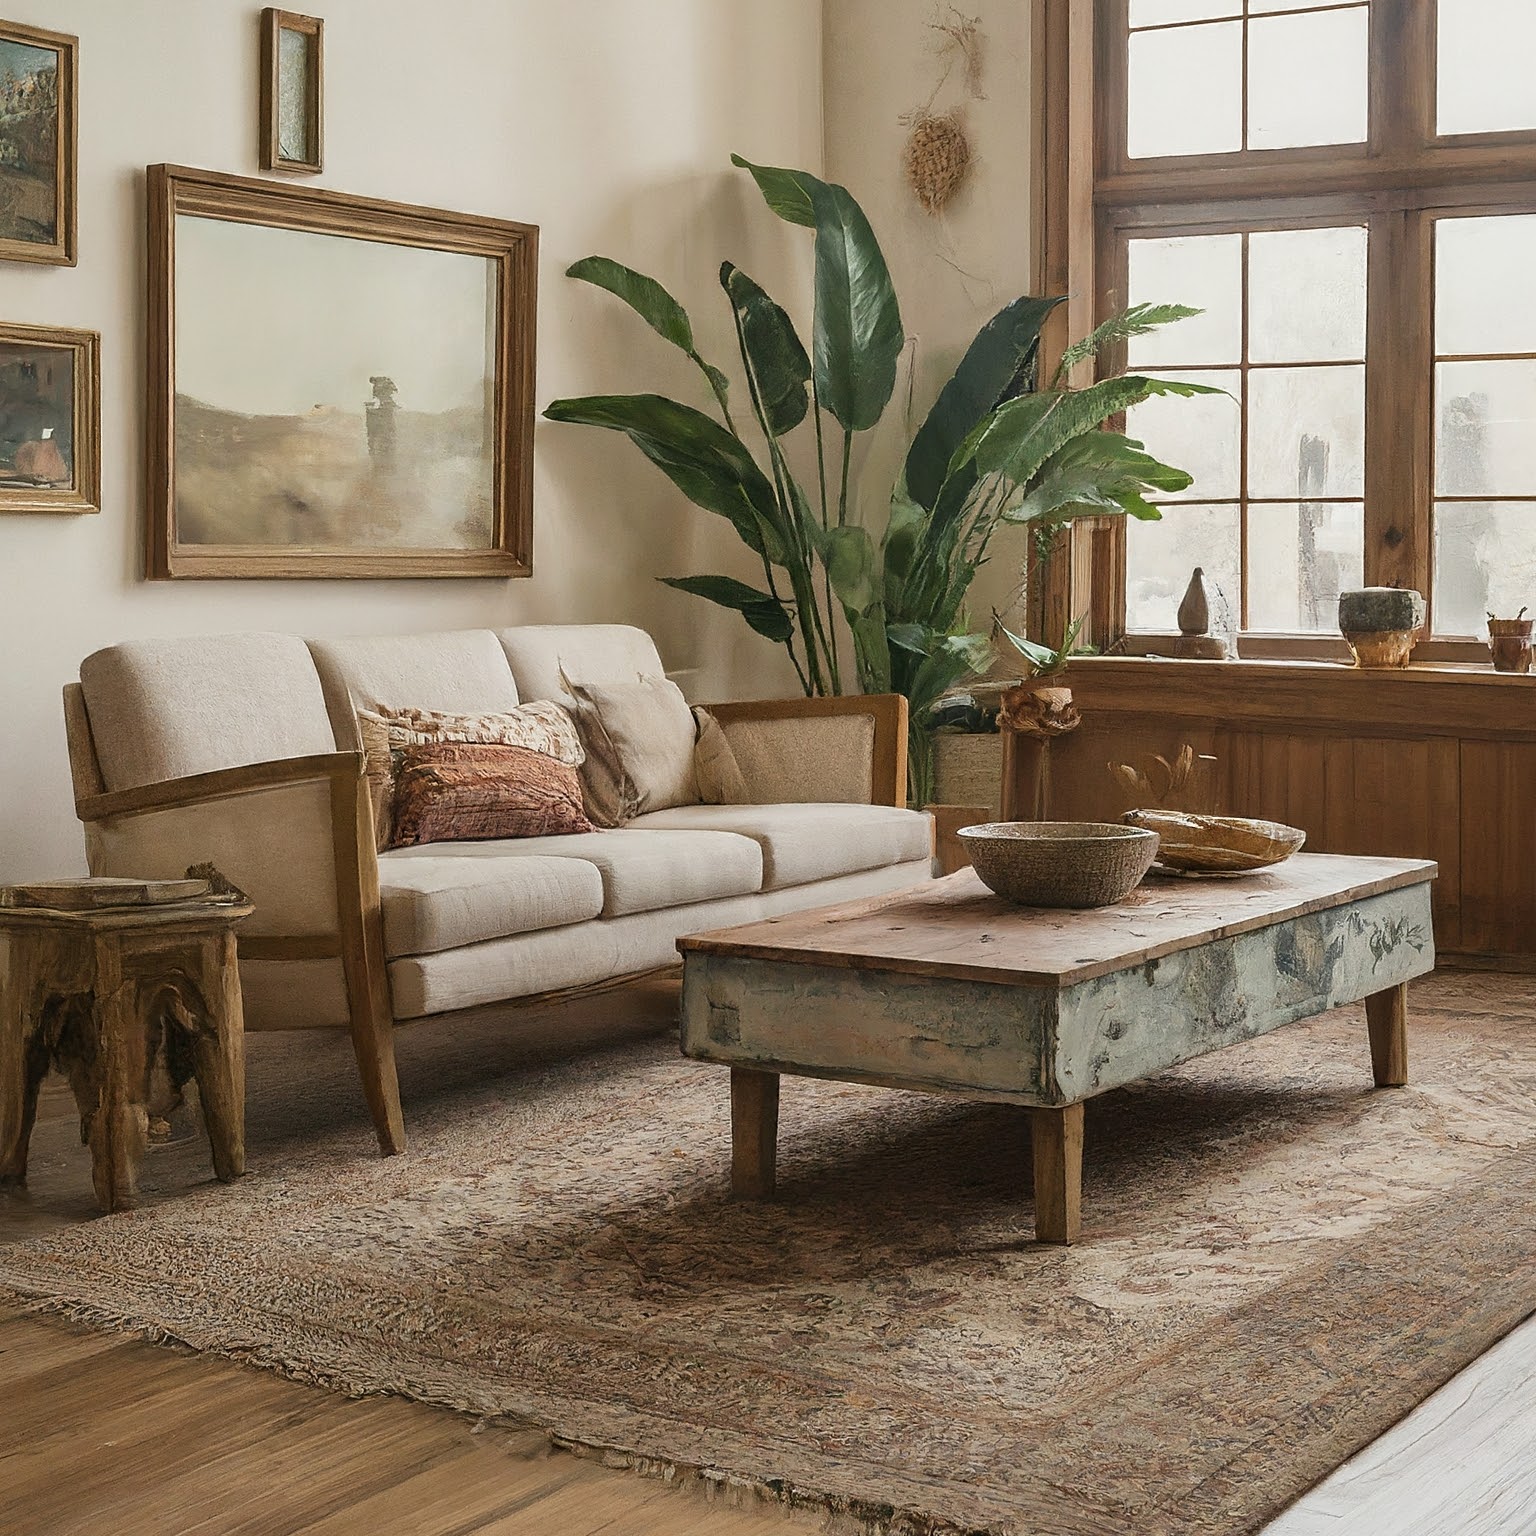 living room boho style featuring rustic furniture